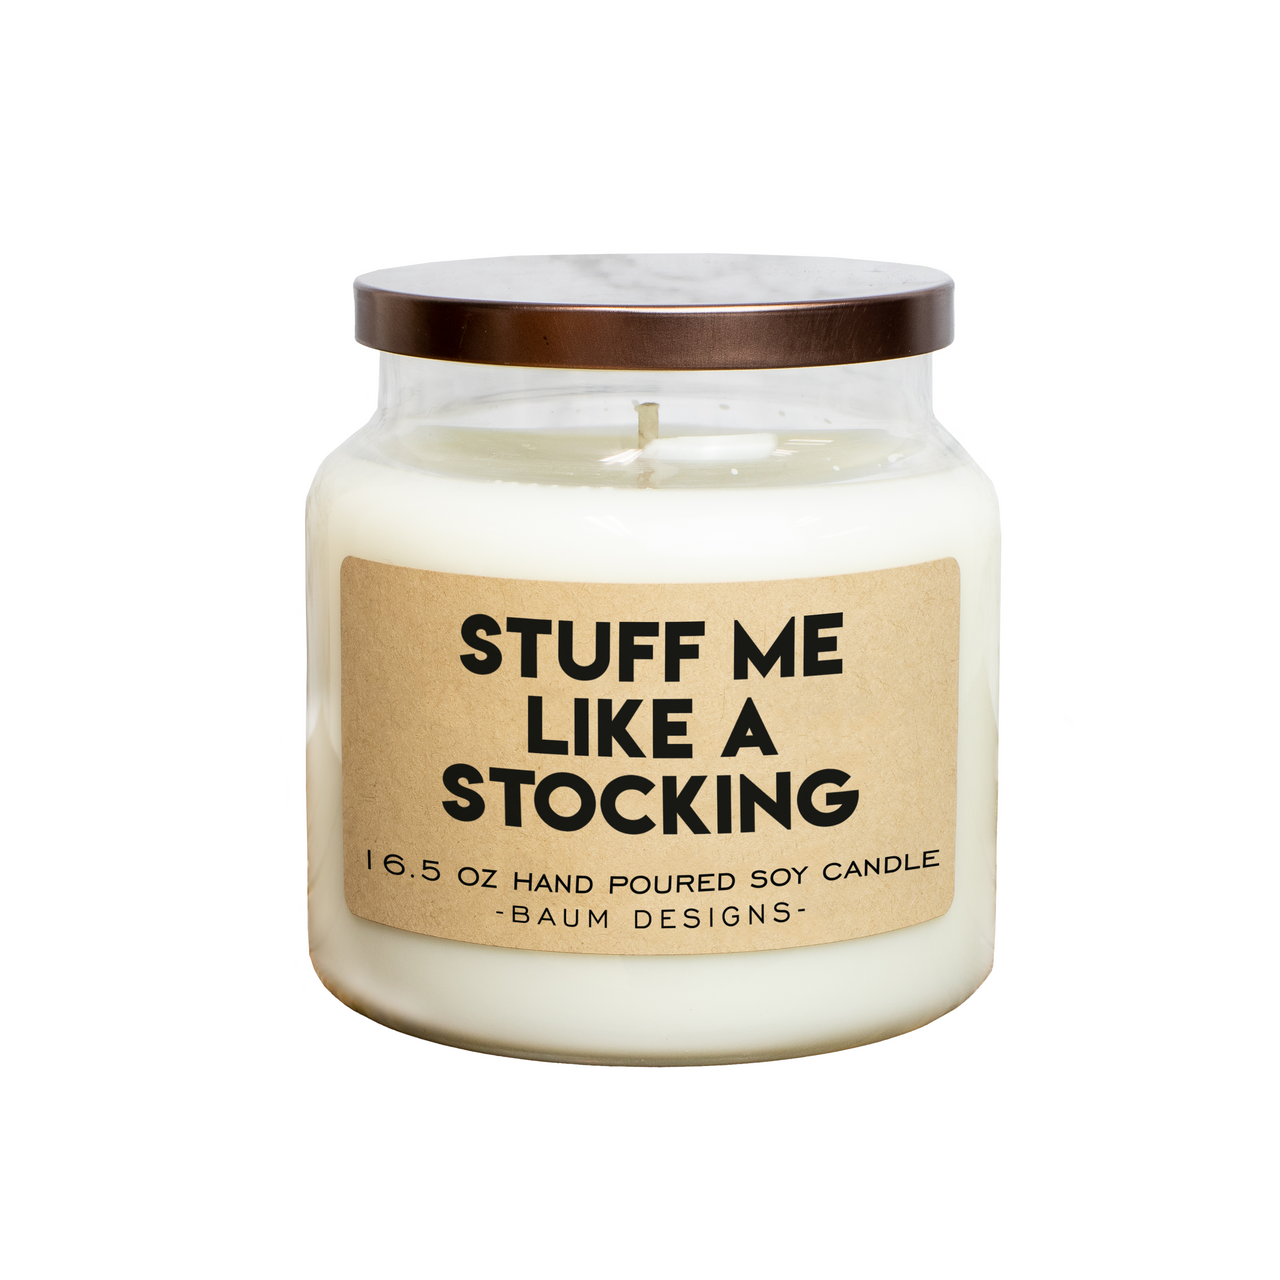 Stuff Me Like A Stocking Soy Candle Candle Baum Designs